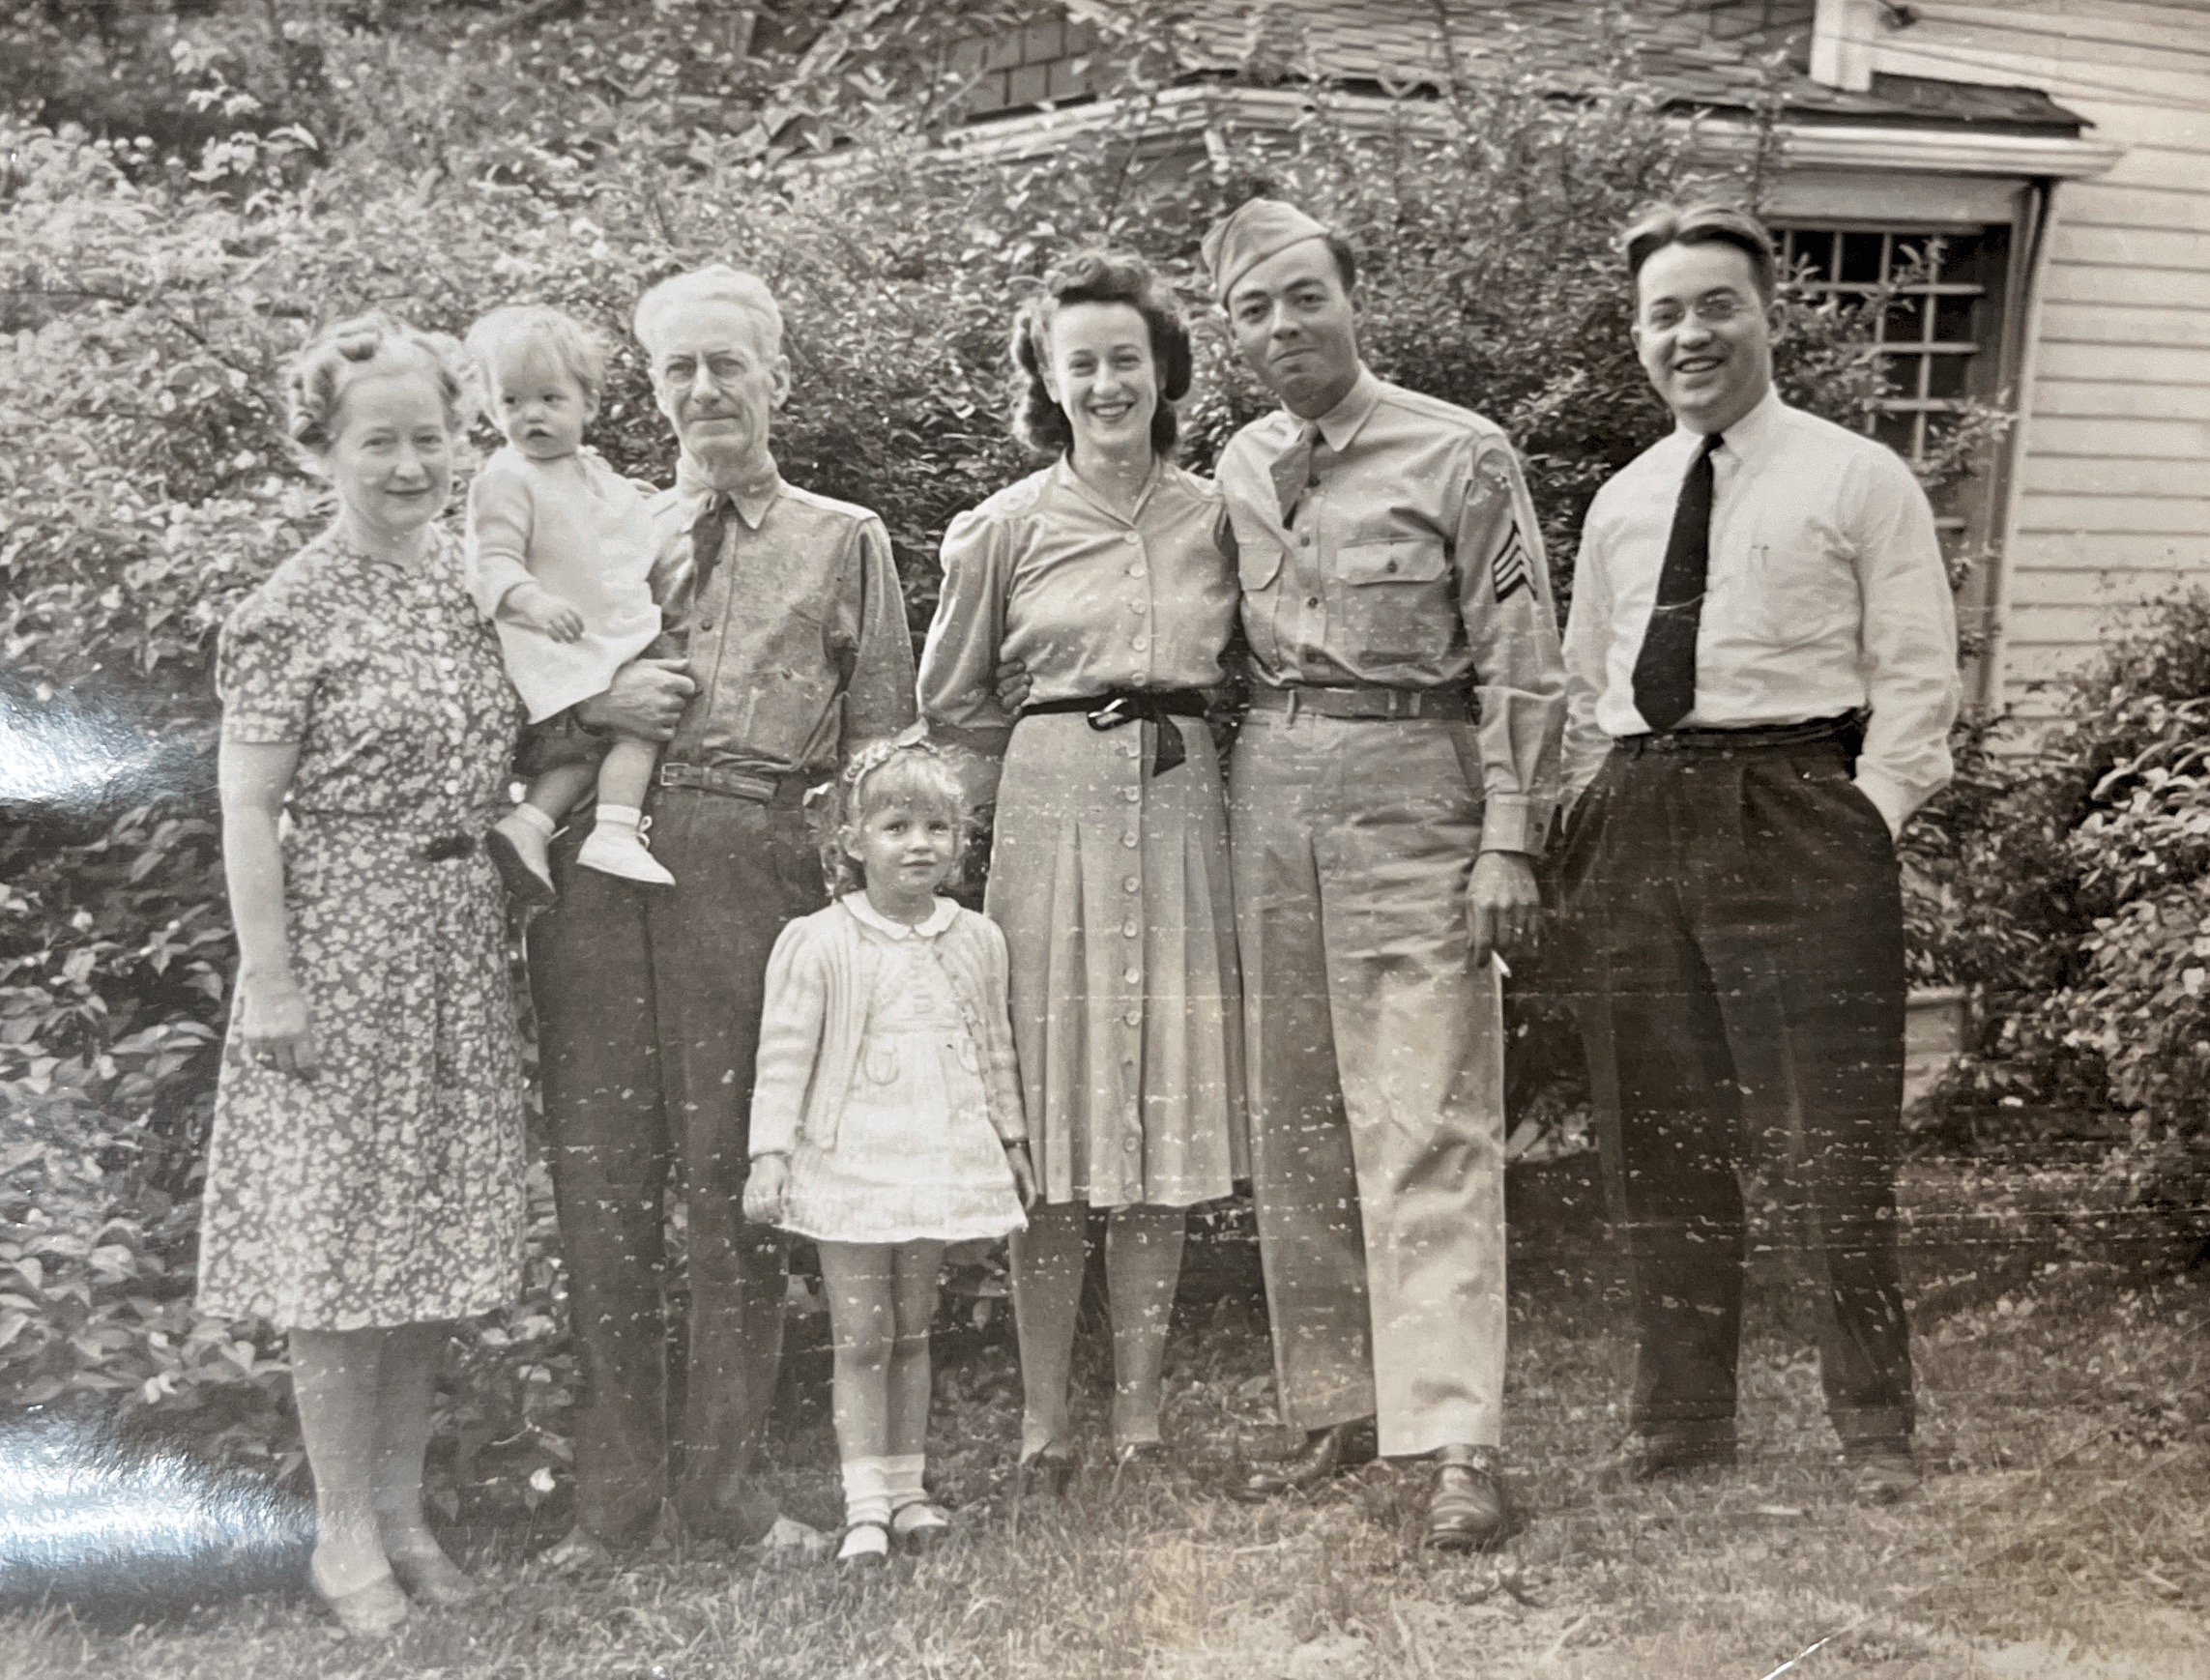 Mother, Dad, Jimmy, Jerre V & the Willms girls. June 1943